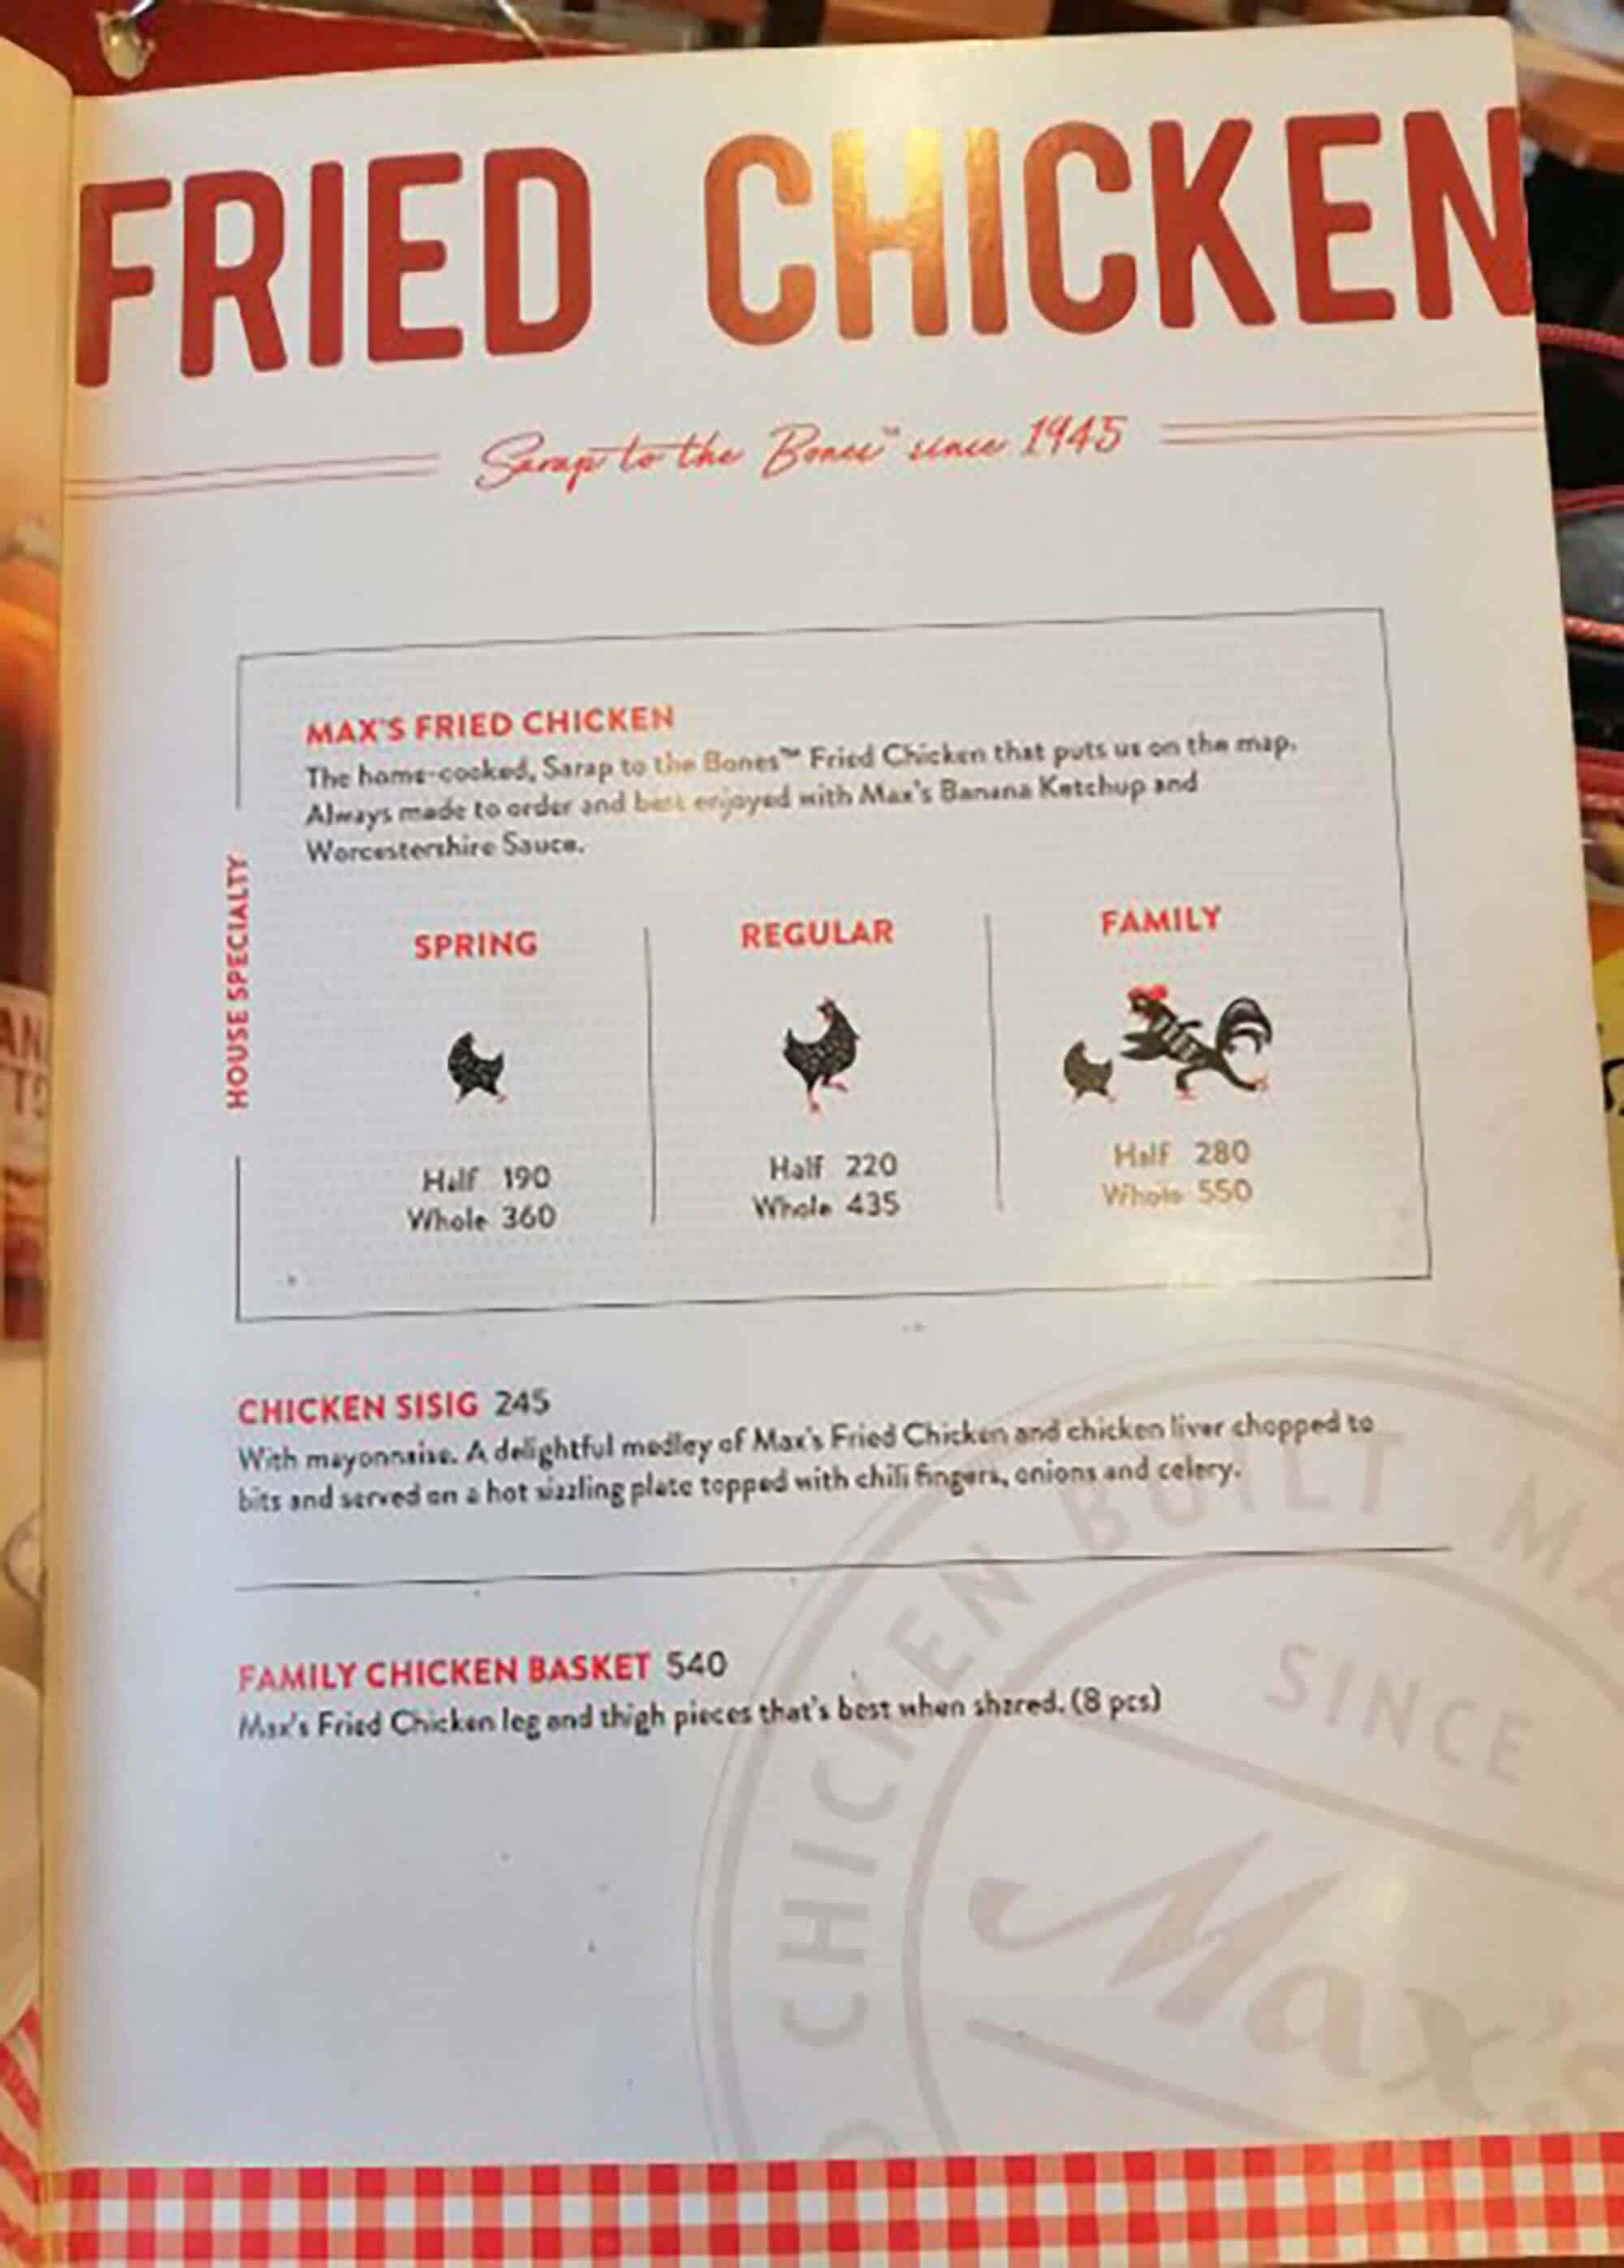 Max's Famous Fried Chicken On Their Menu